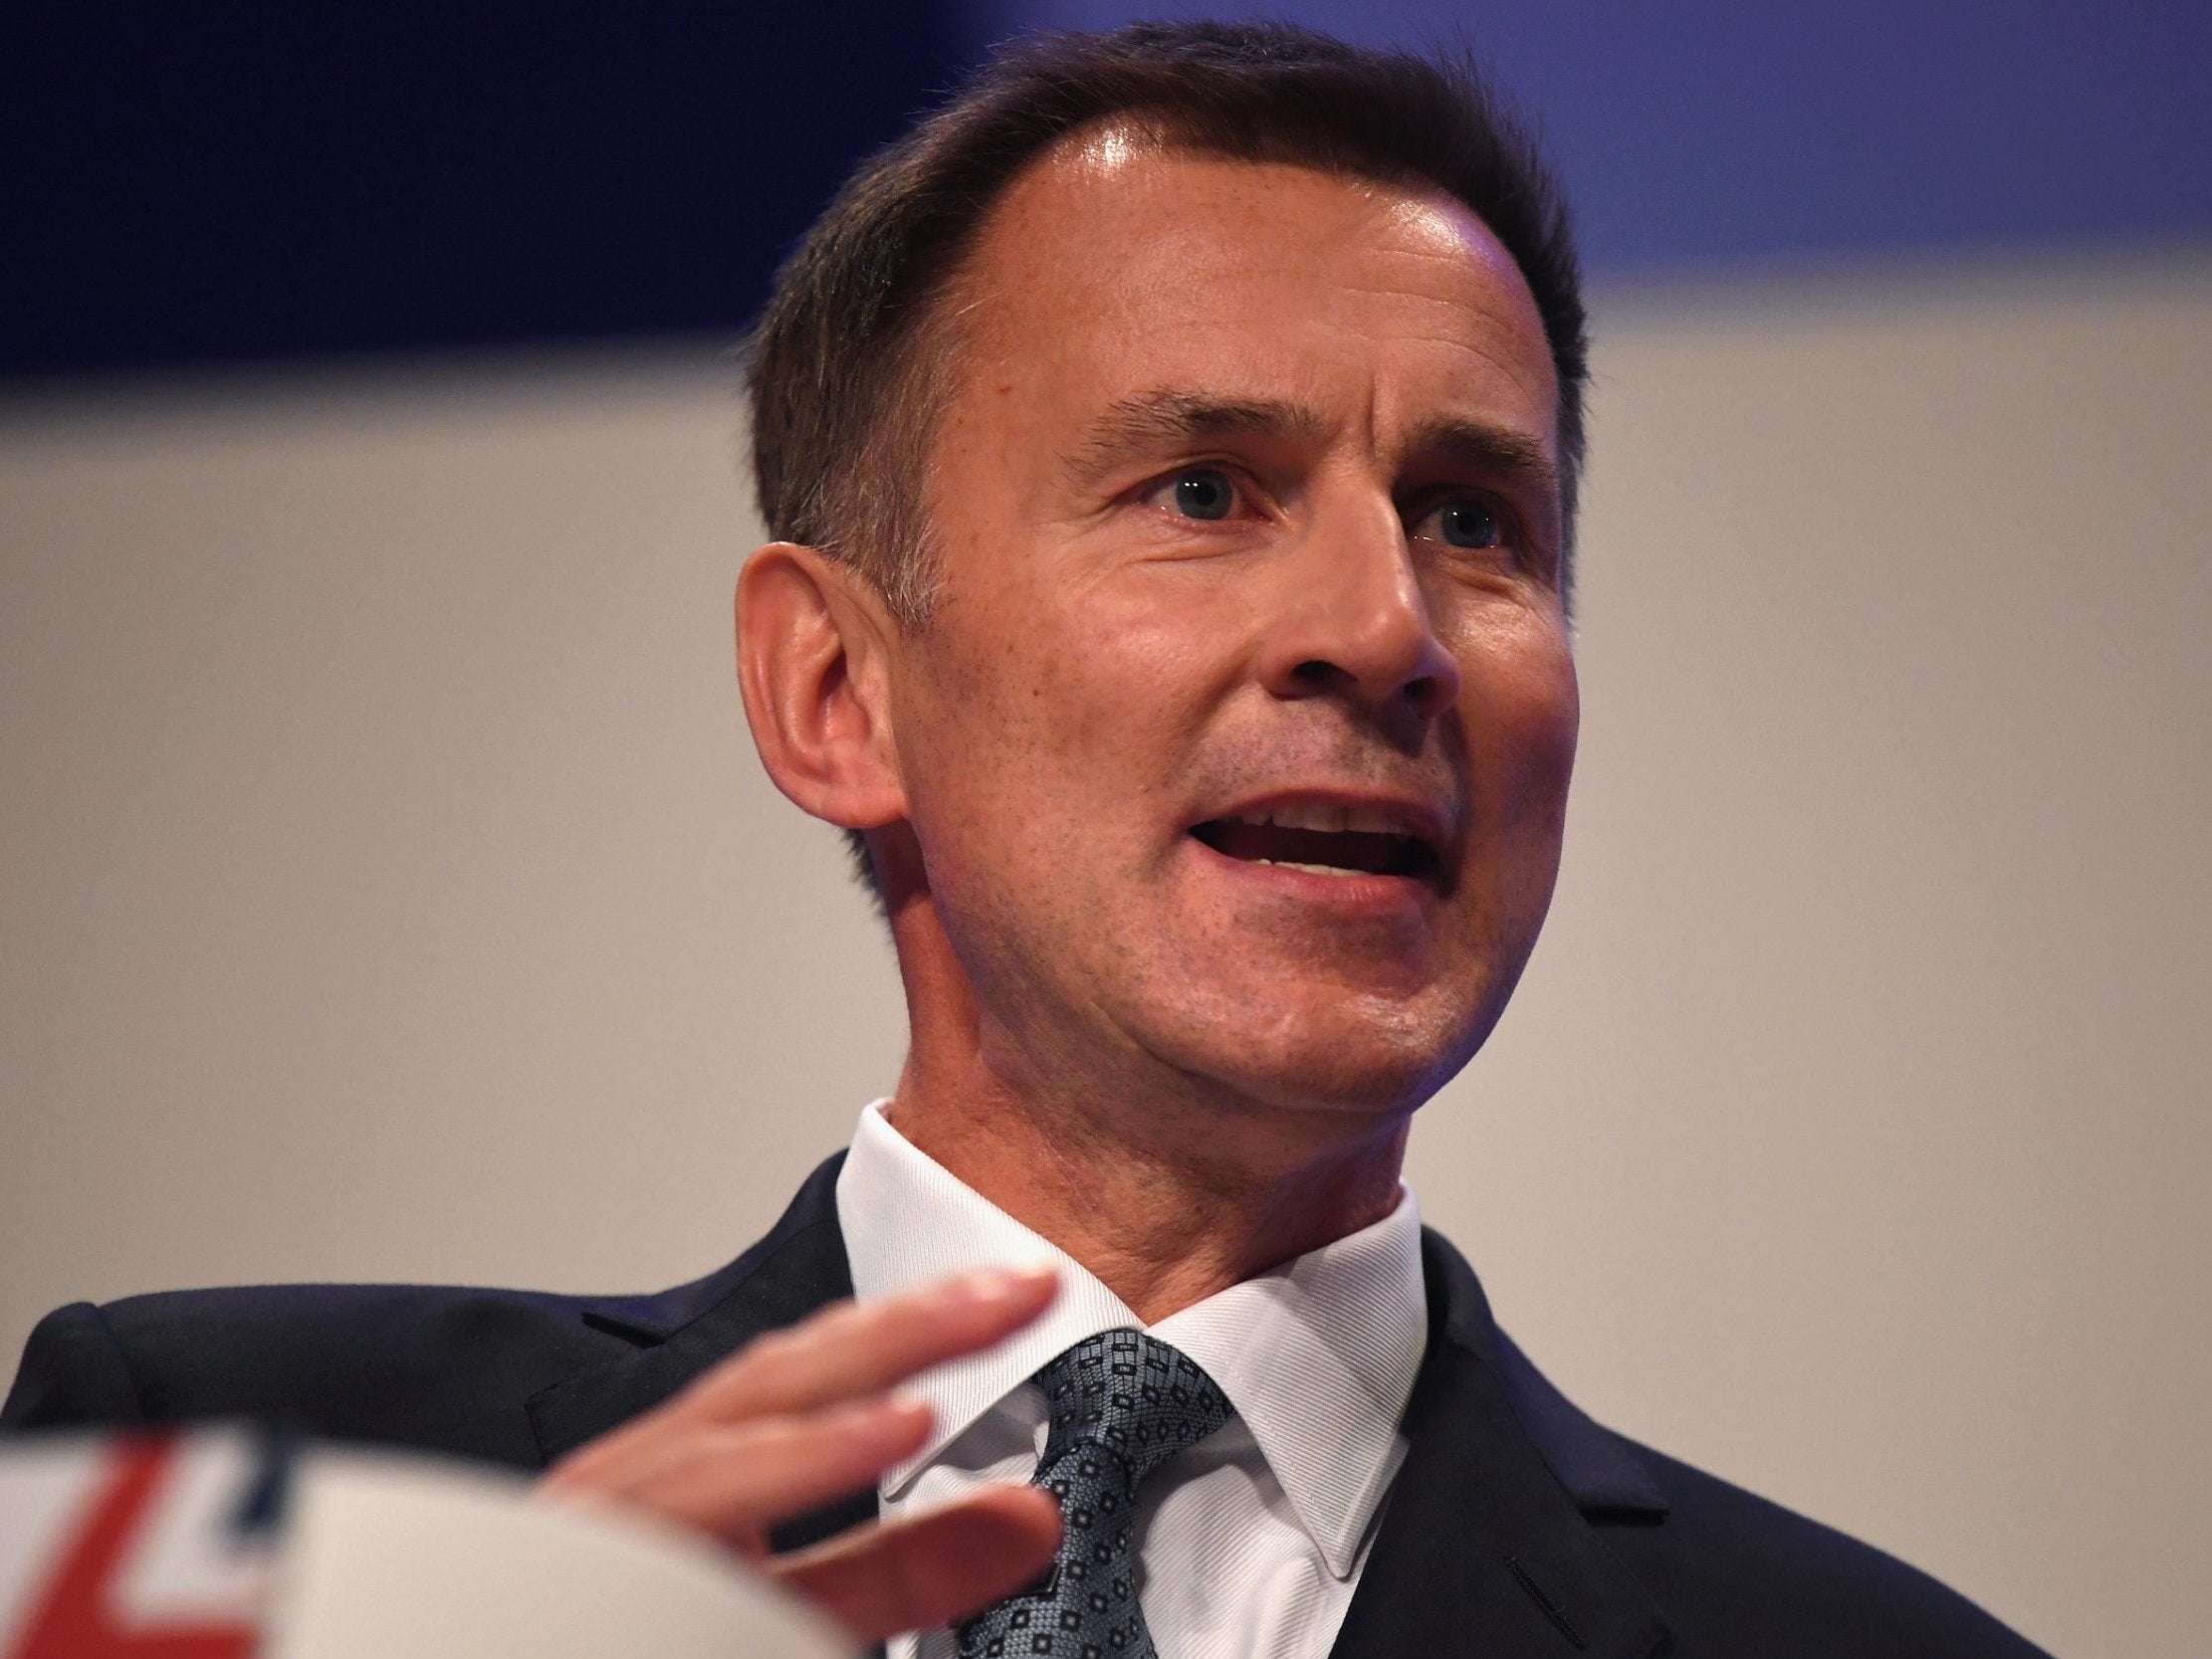 Foreign secretary Jeremy Hunt said the EU should not 'mistake British politeness for British weakness'.